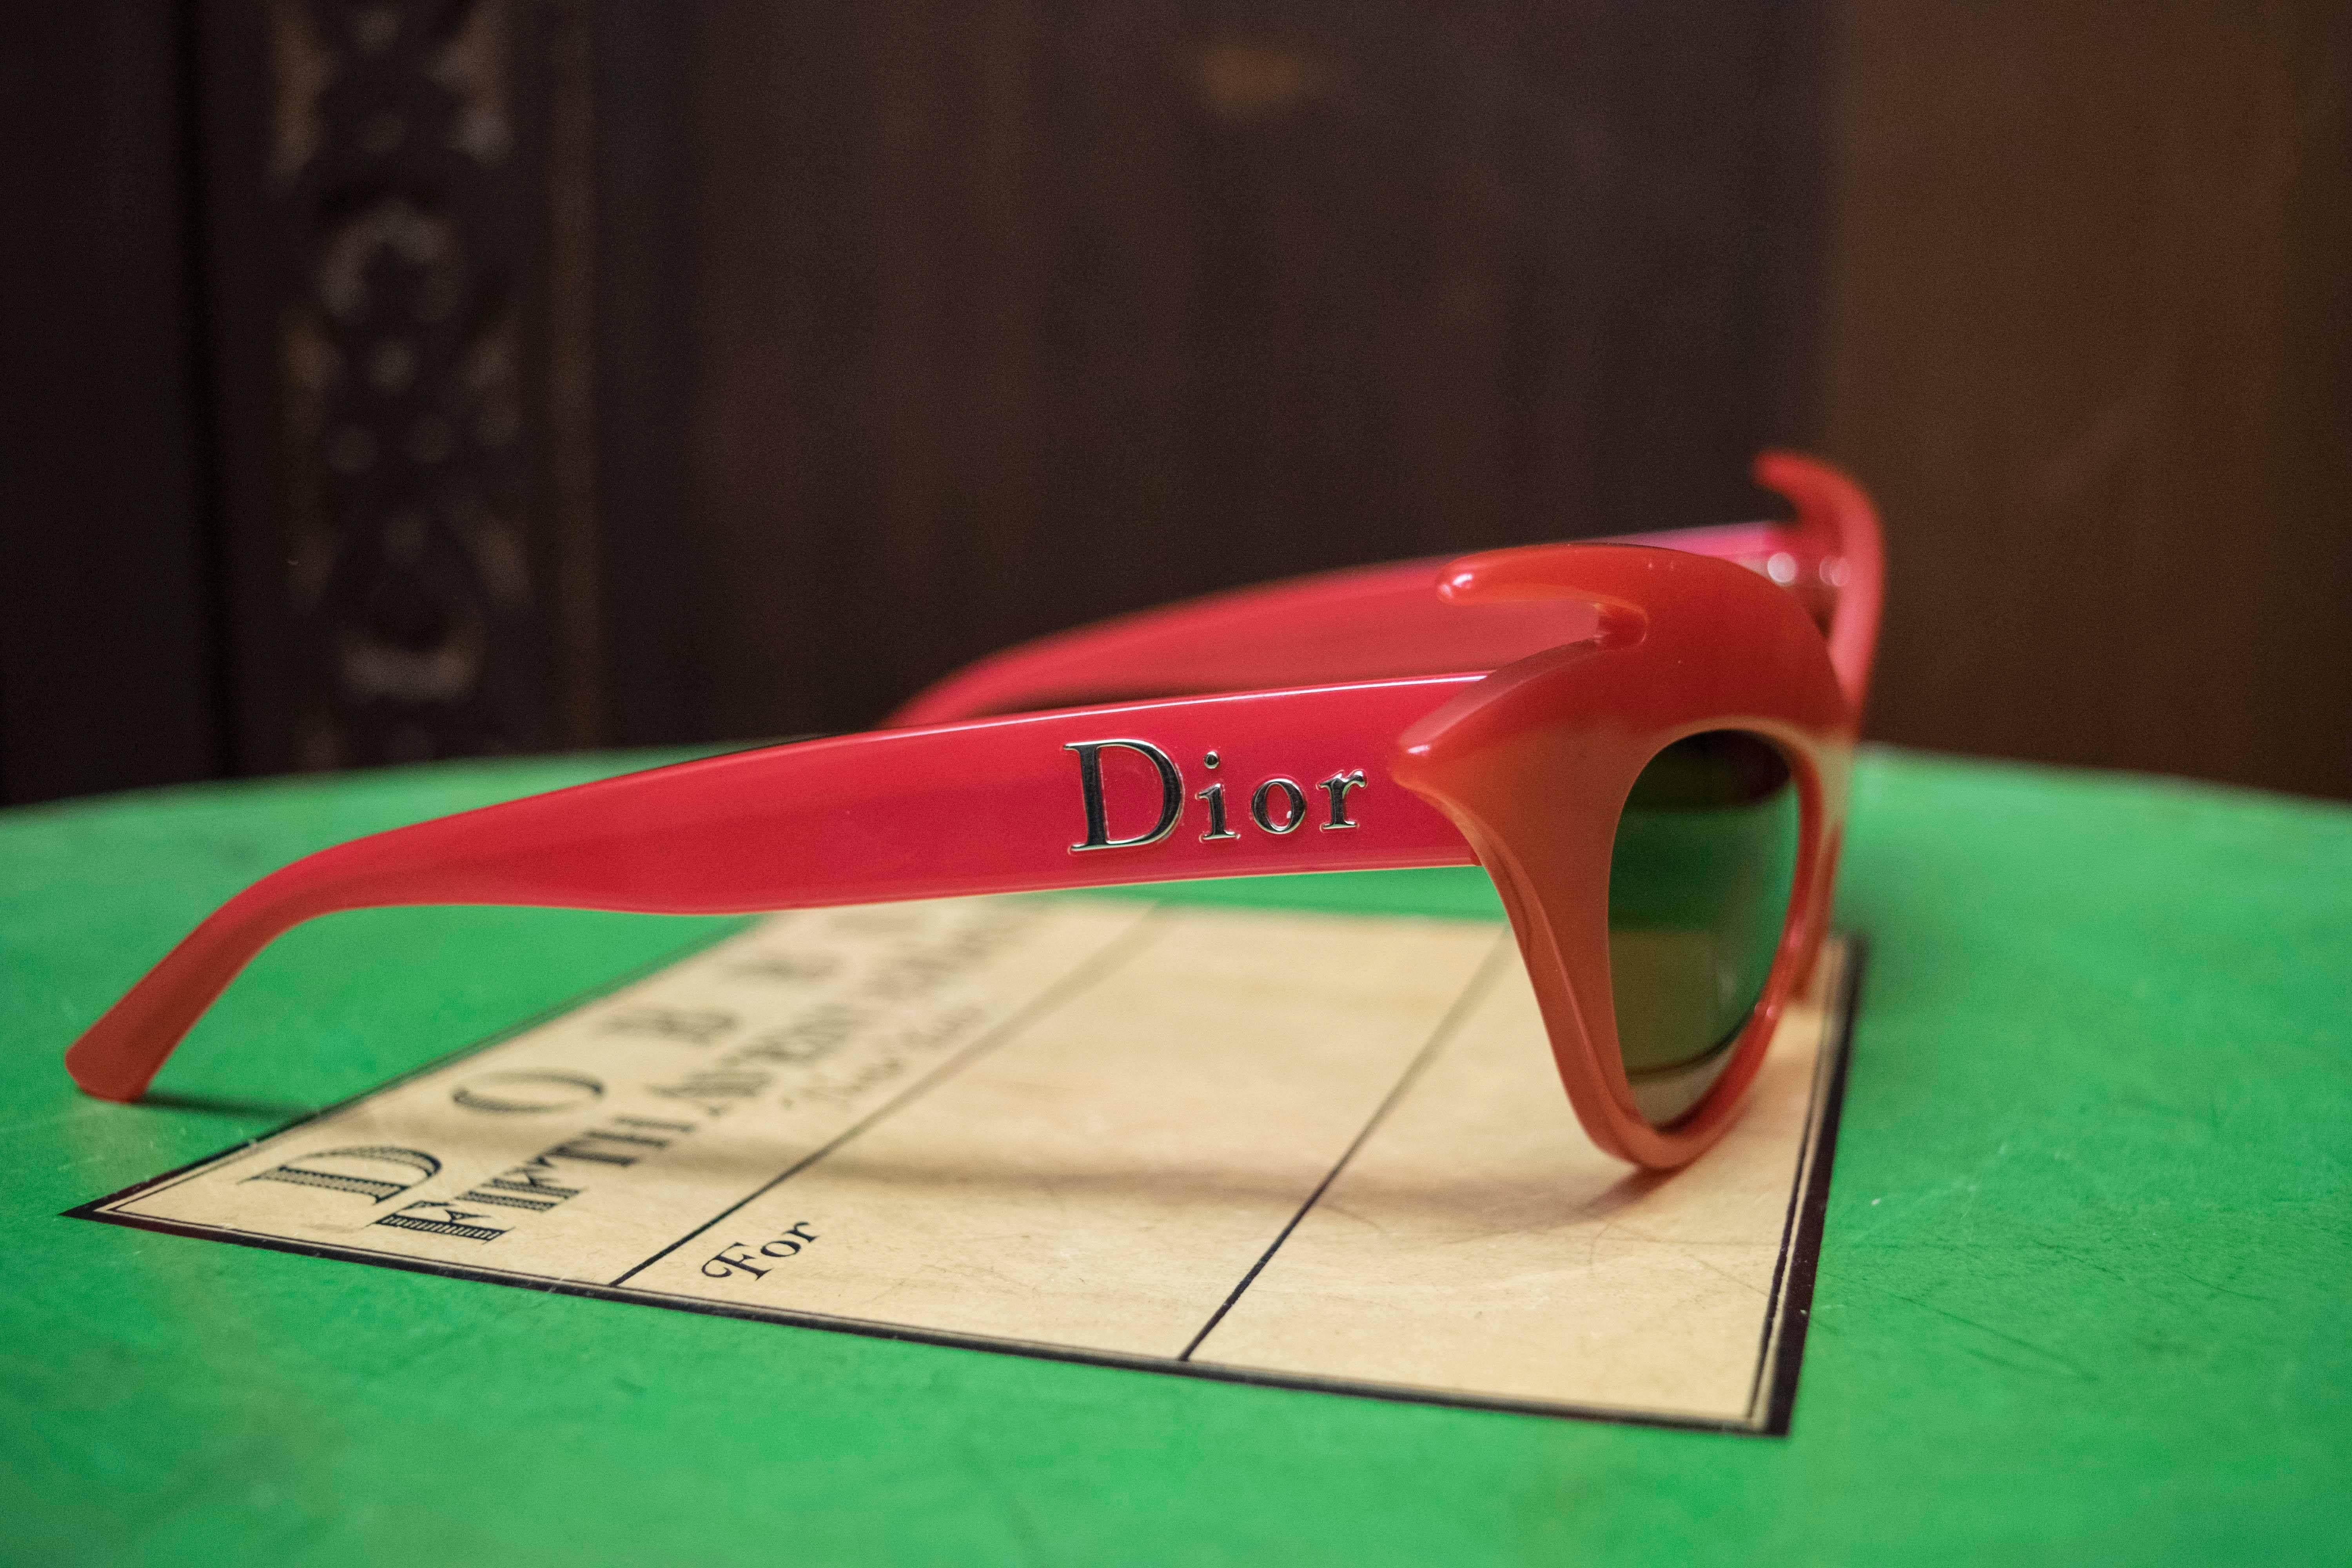 Miss Dior Cherie limited edition sunglasses in raspberry red. Commissioned by Sofia Coppola for the Miss Dior Cherie commercial, they are number 466 out of 1000. 

Measurements:
Lens Width: 2 1/2